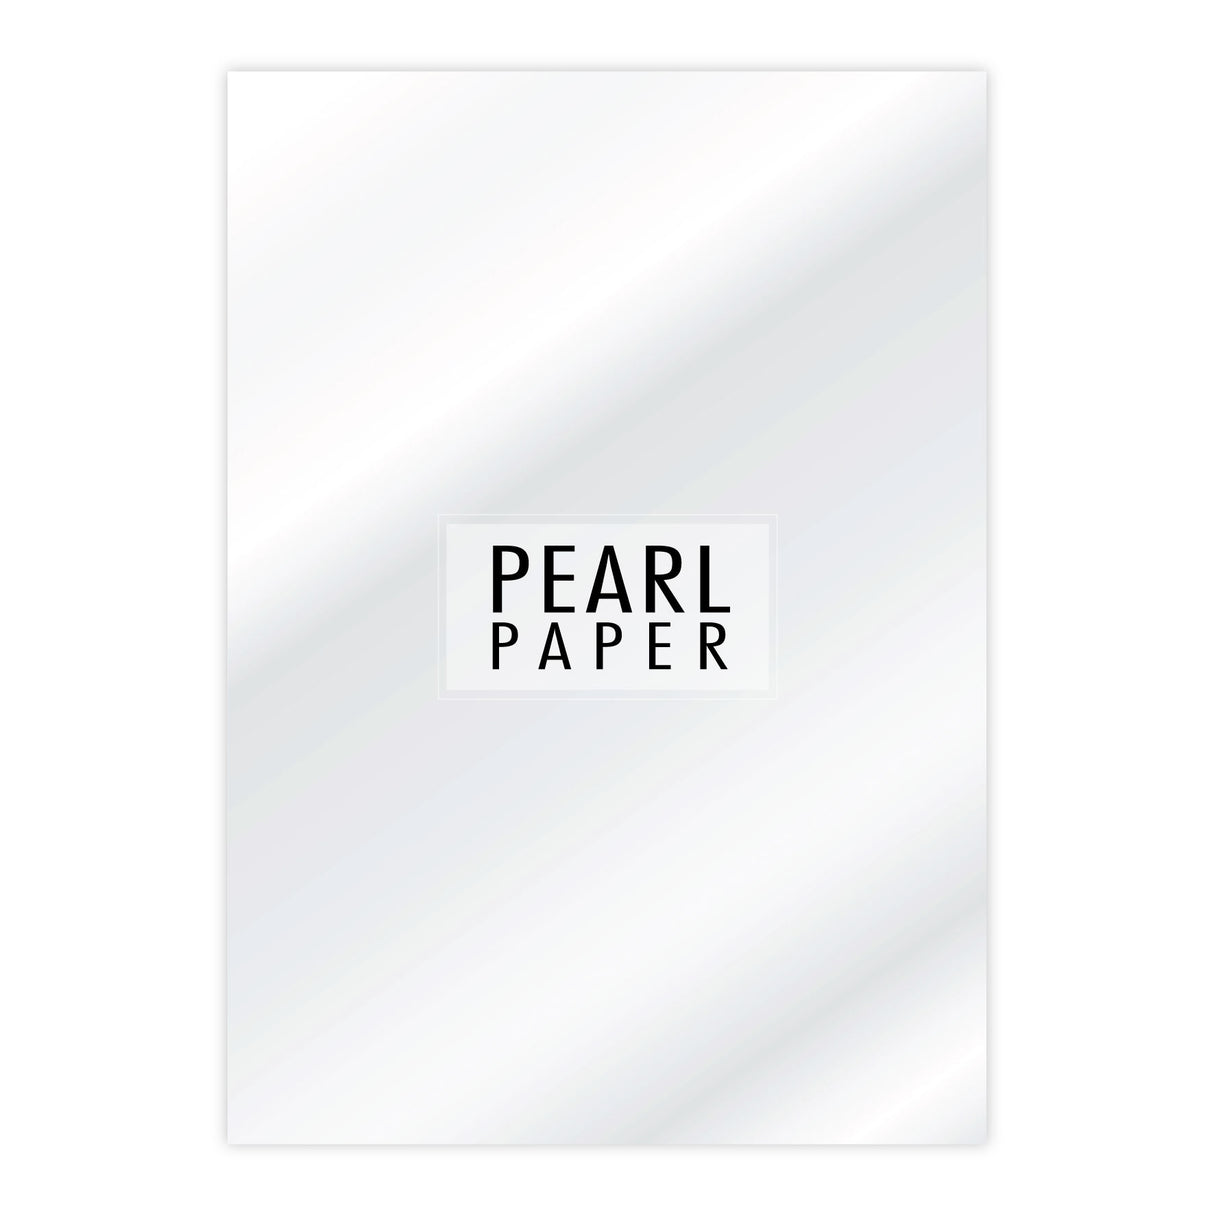 Chloes A4 Luxury Pearl Paper 10 Sheets Crystal White